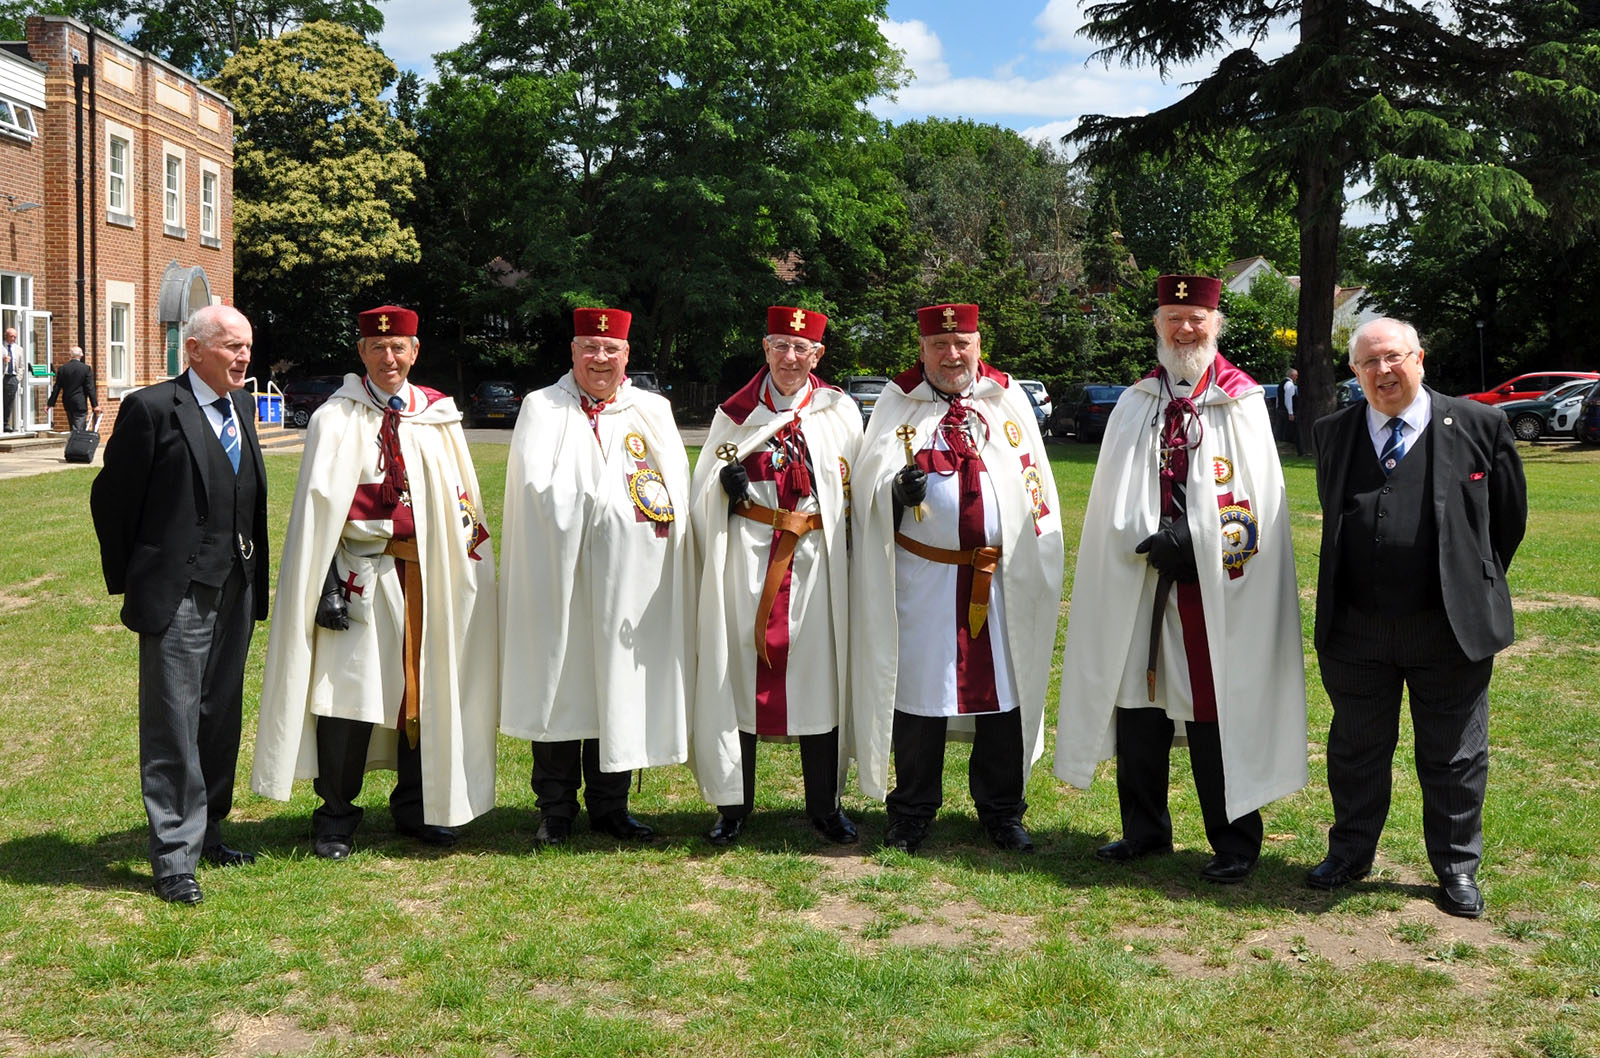 A visit to the Provincial Priory of Middlesex